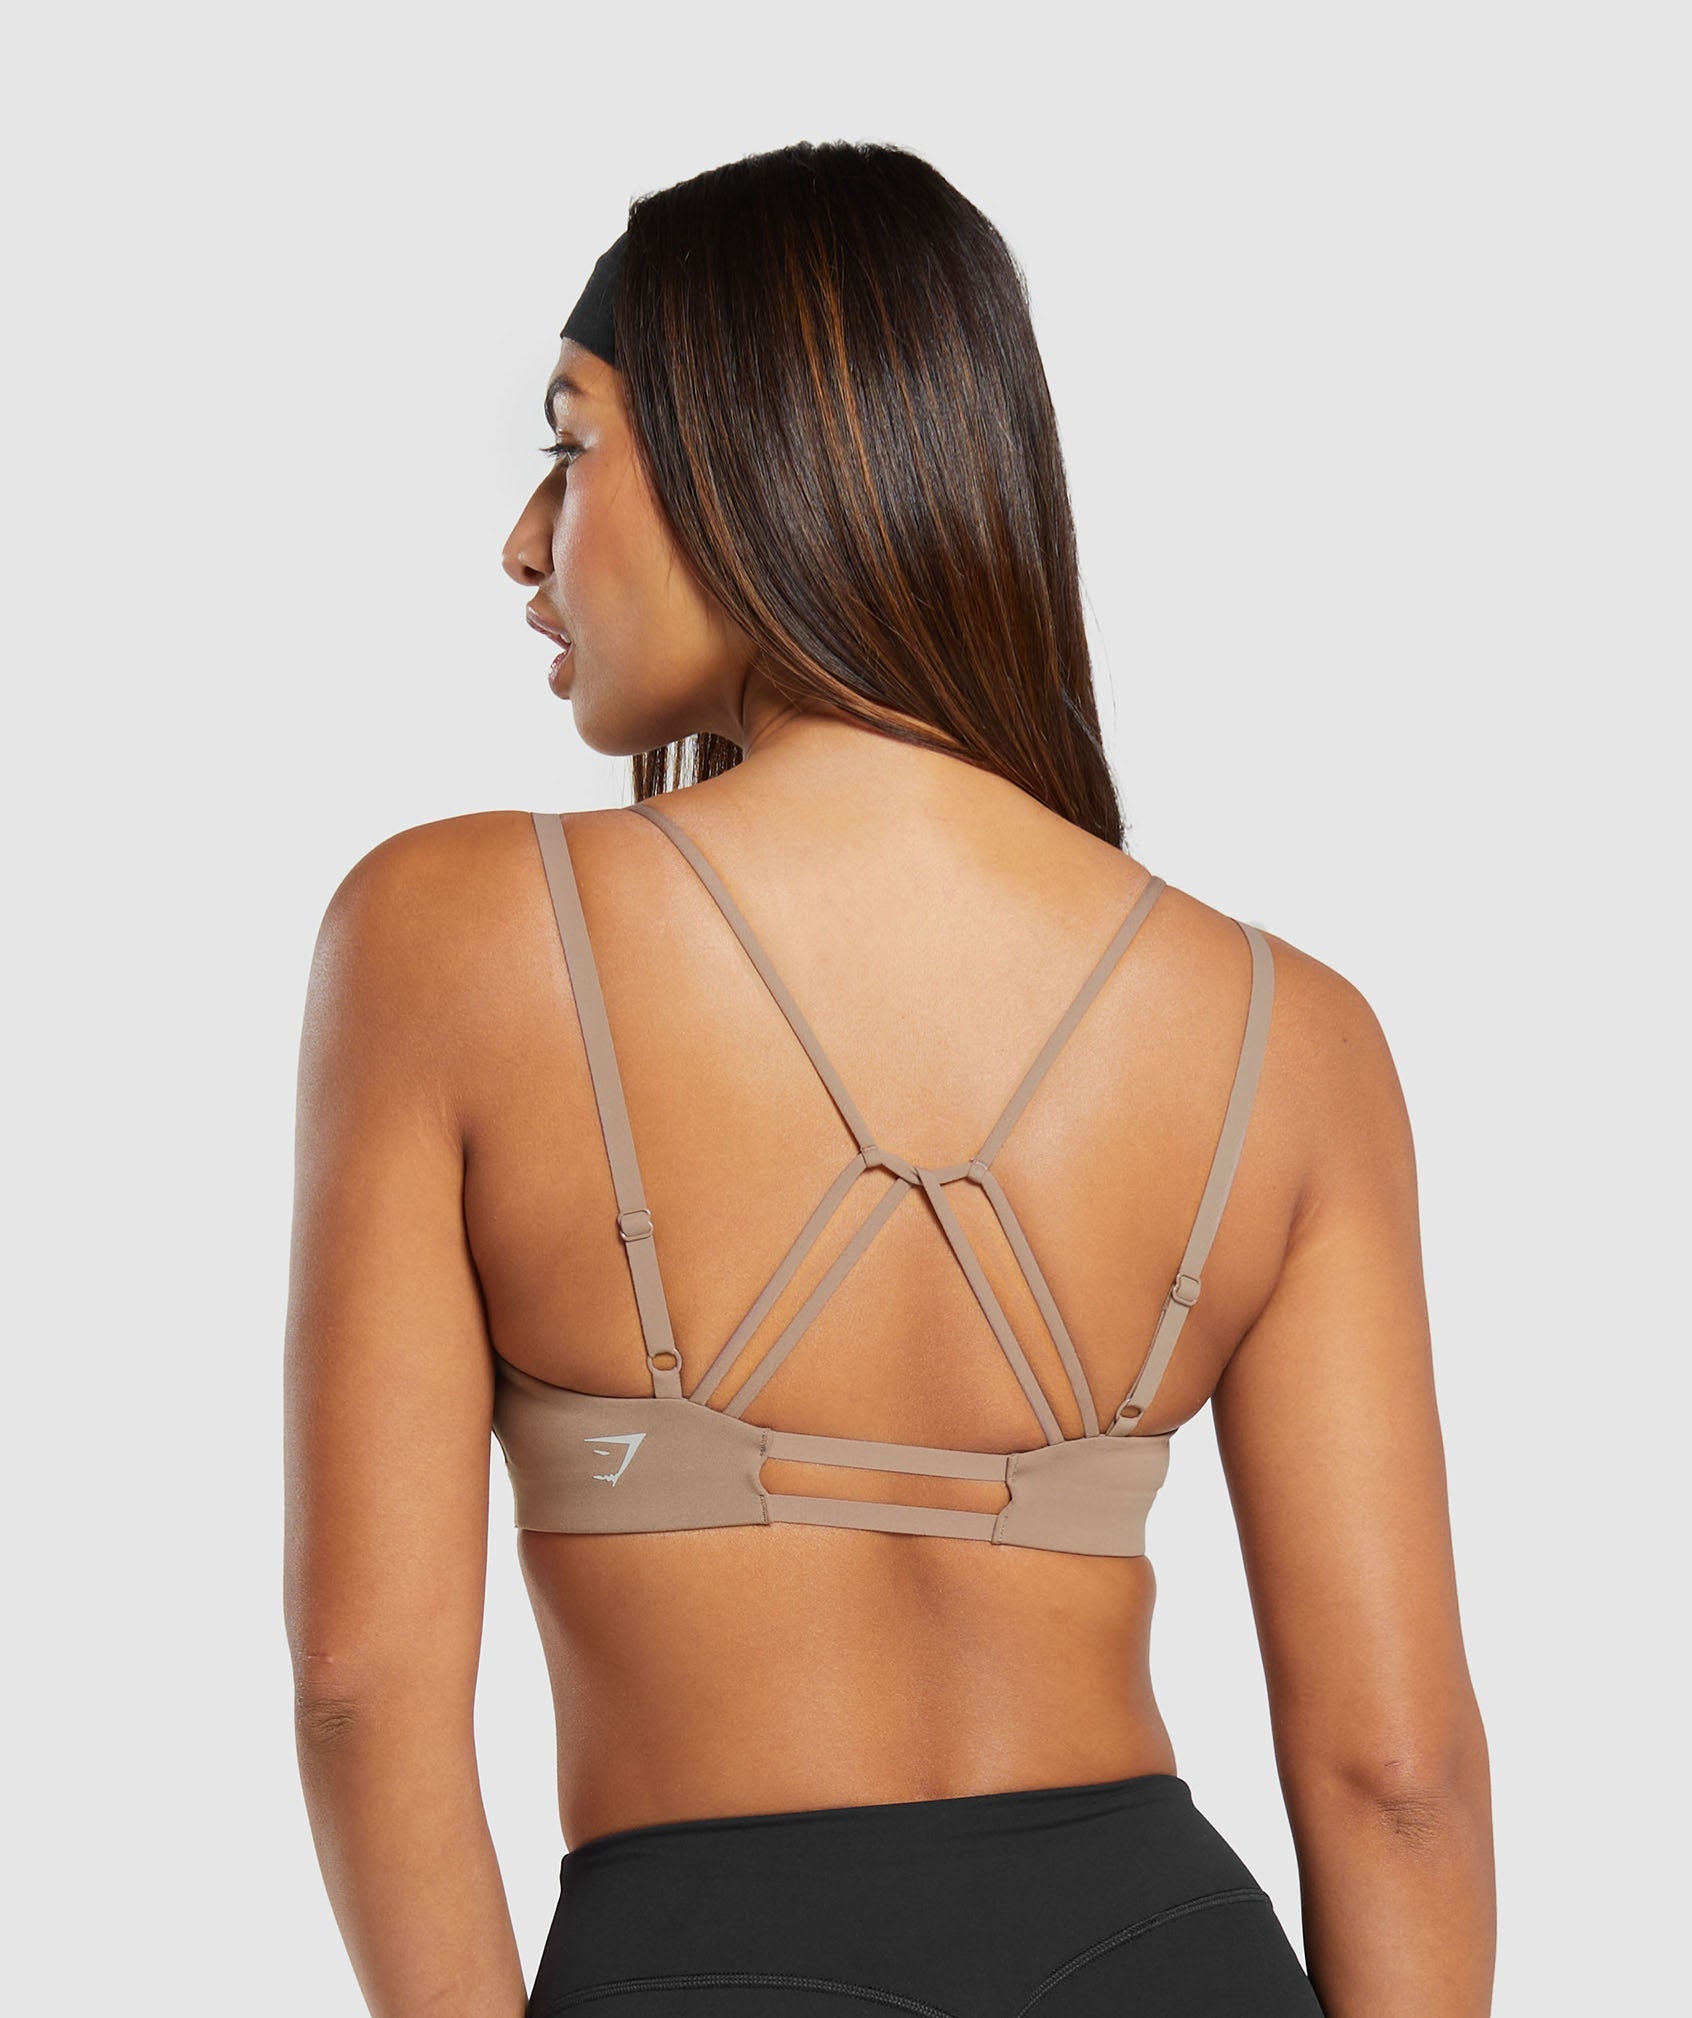 4-Piece Light-colored Cami Bra Top Set with Lace Backless Design